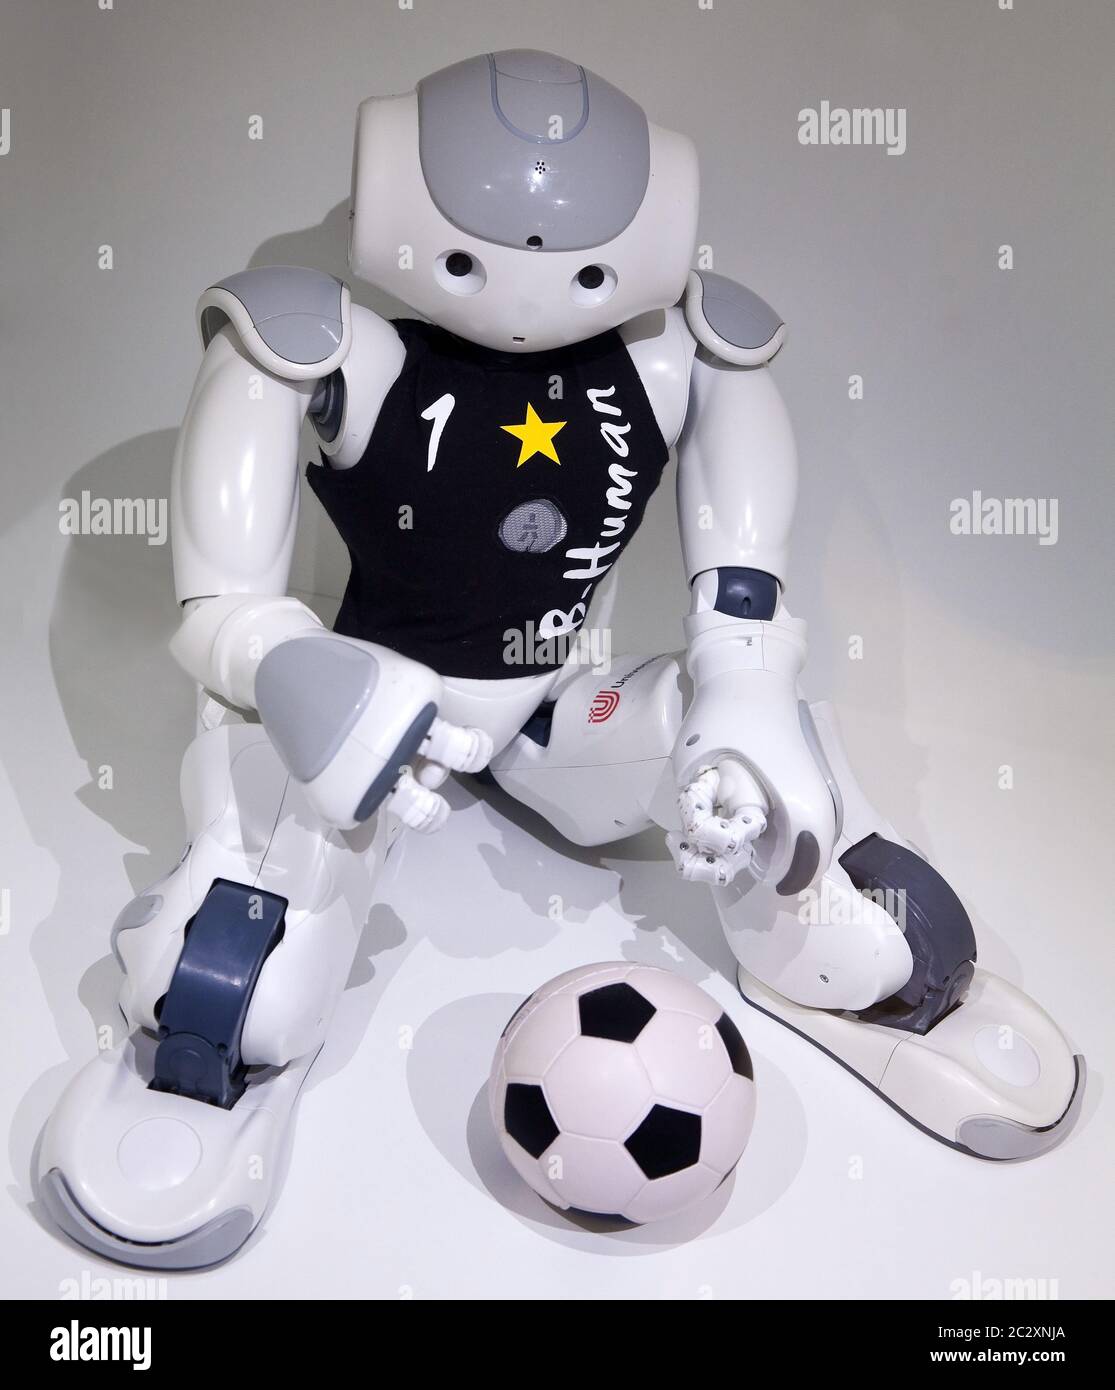 Nao, a humanoid robot that can play football, Germany Stock Photo